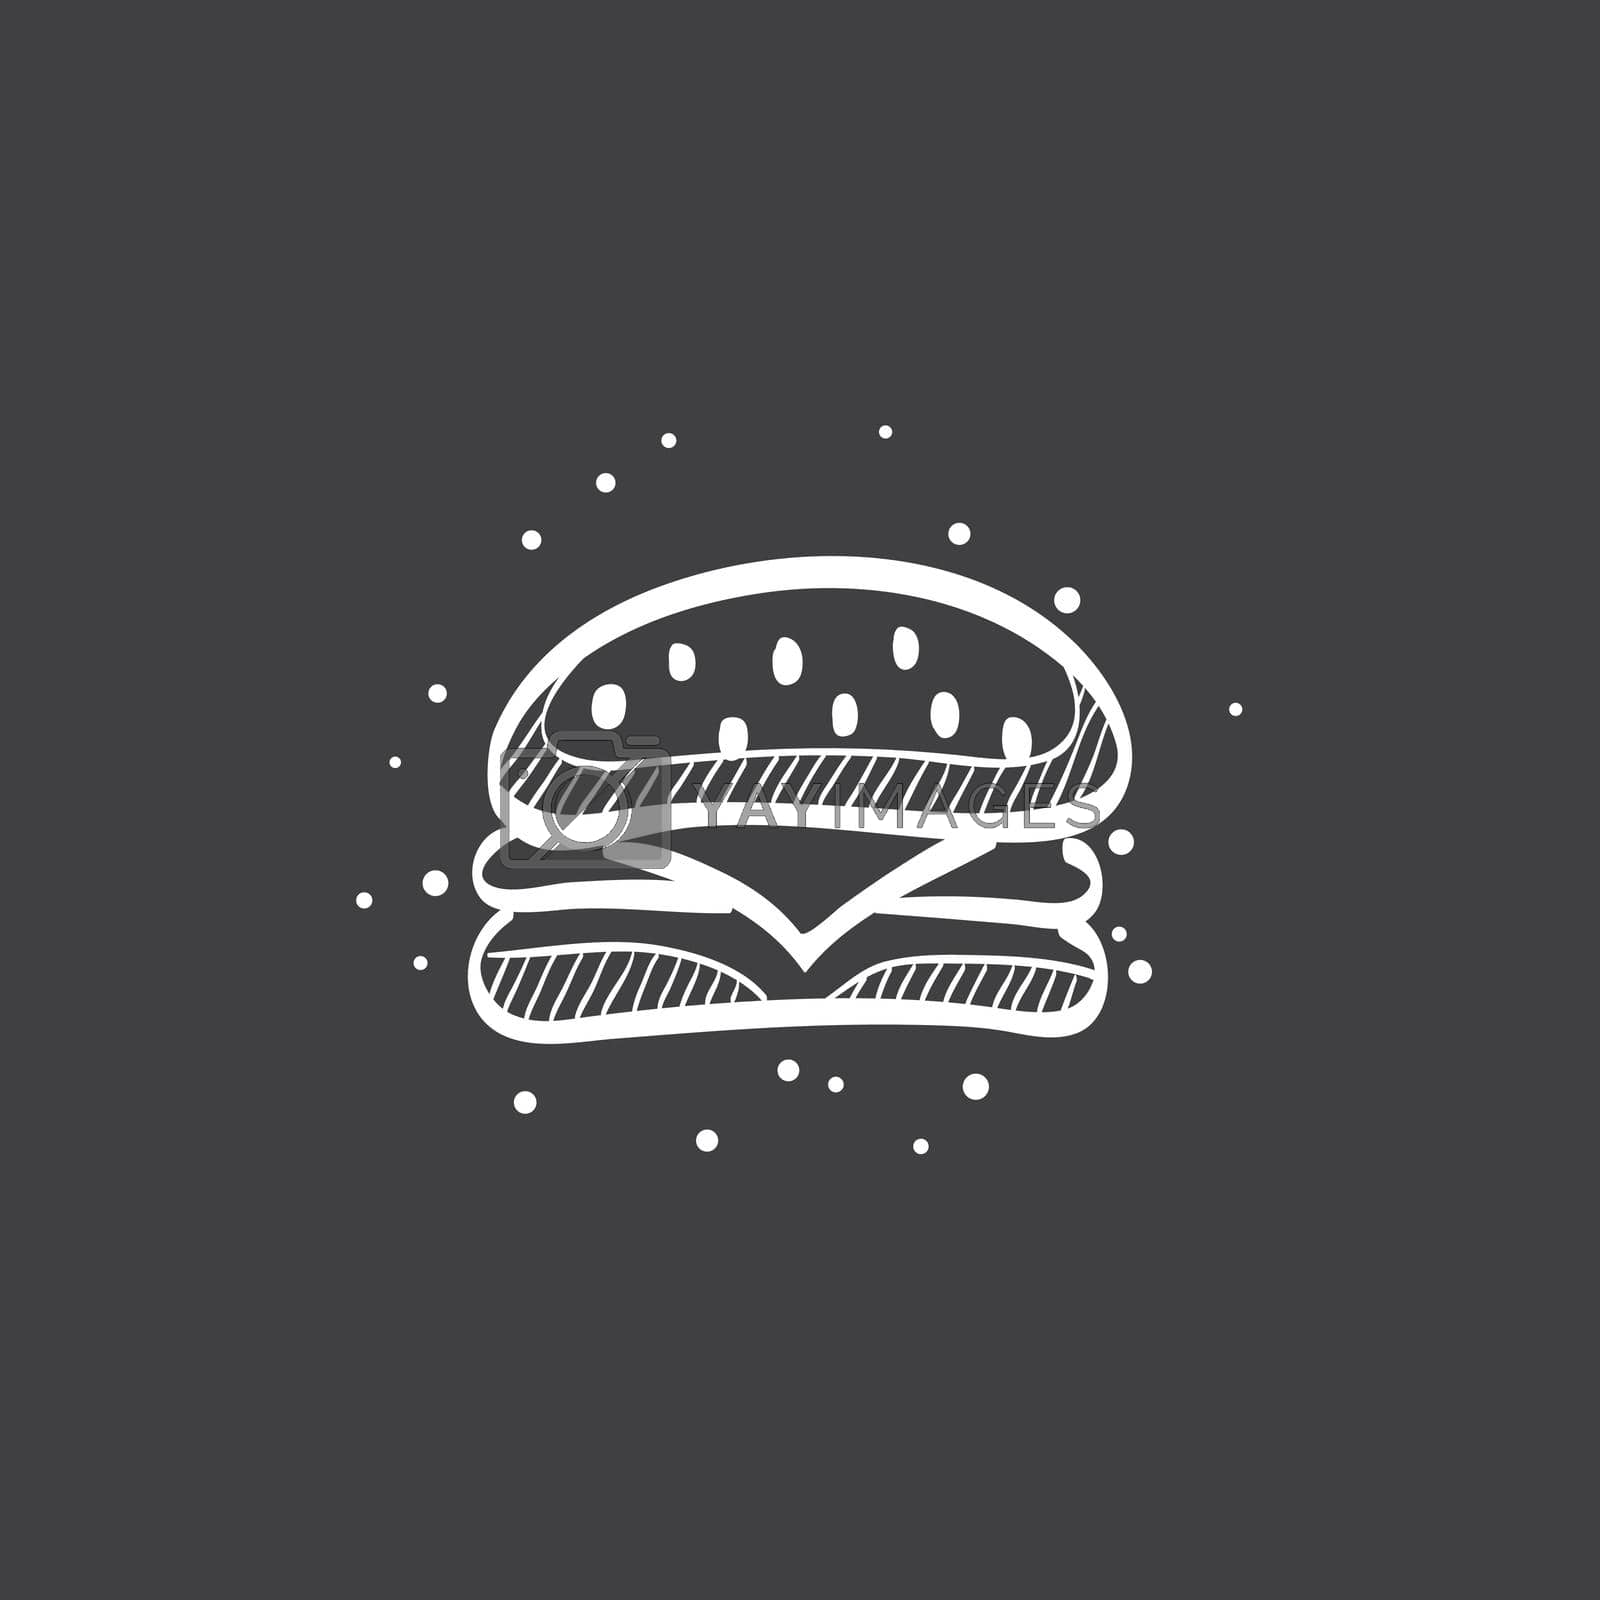 Royalty free image of Sketch icon in black - Burger by puruan